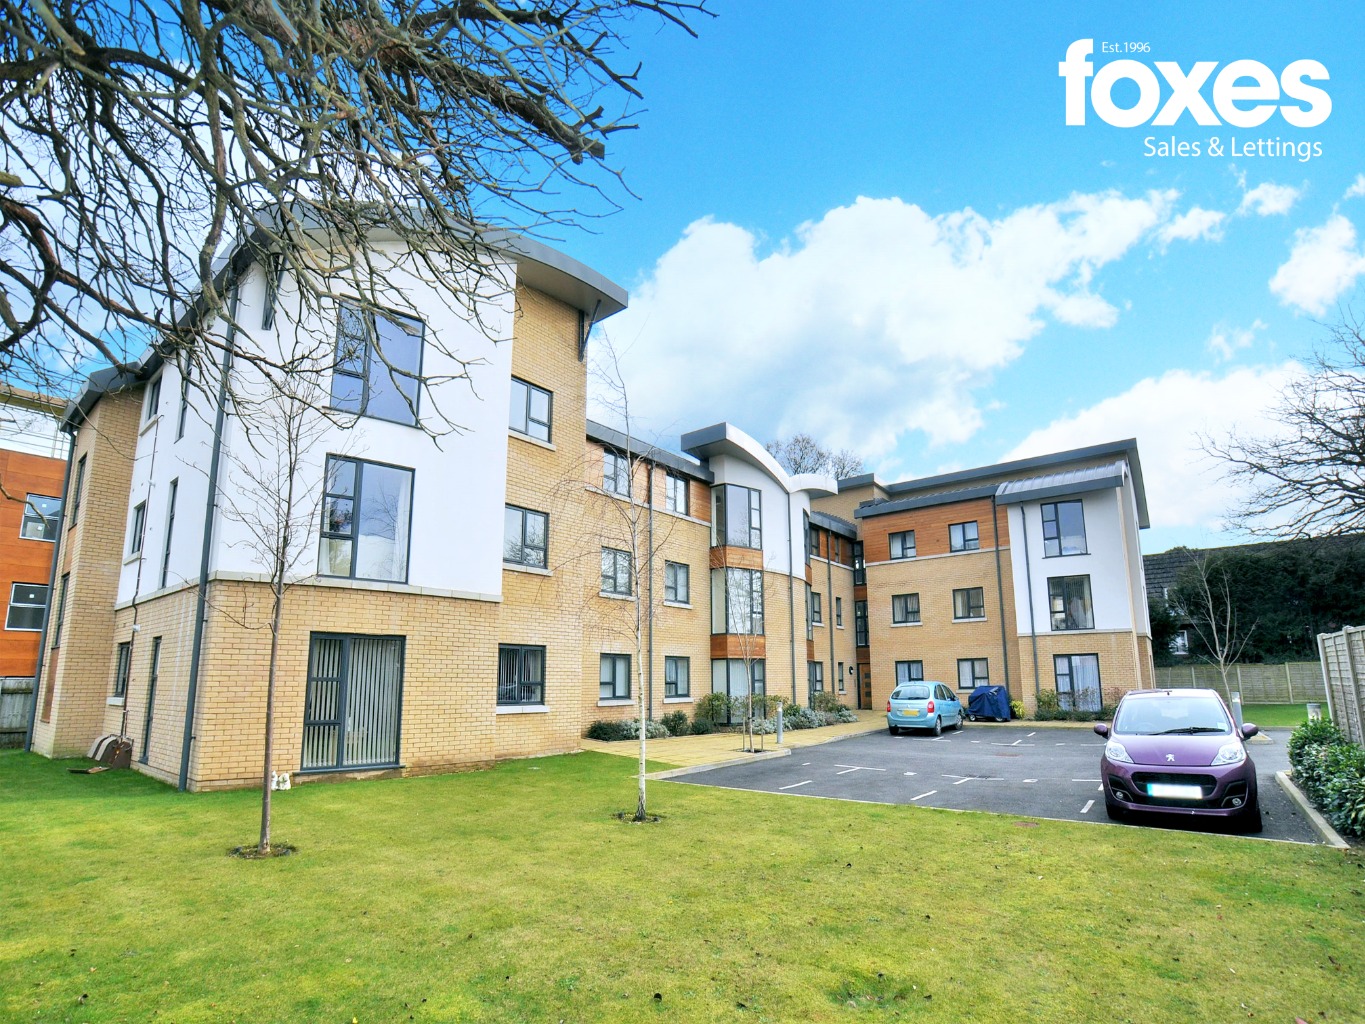 2 bed flat to rent in Princes Road, Ferndown - Property Image 1